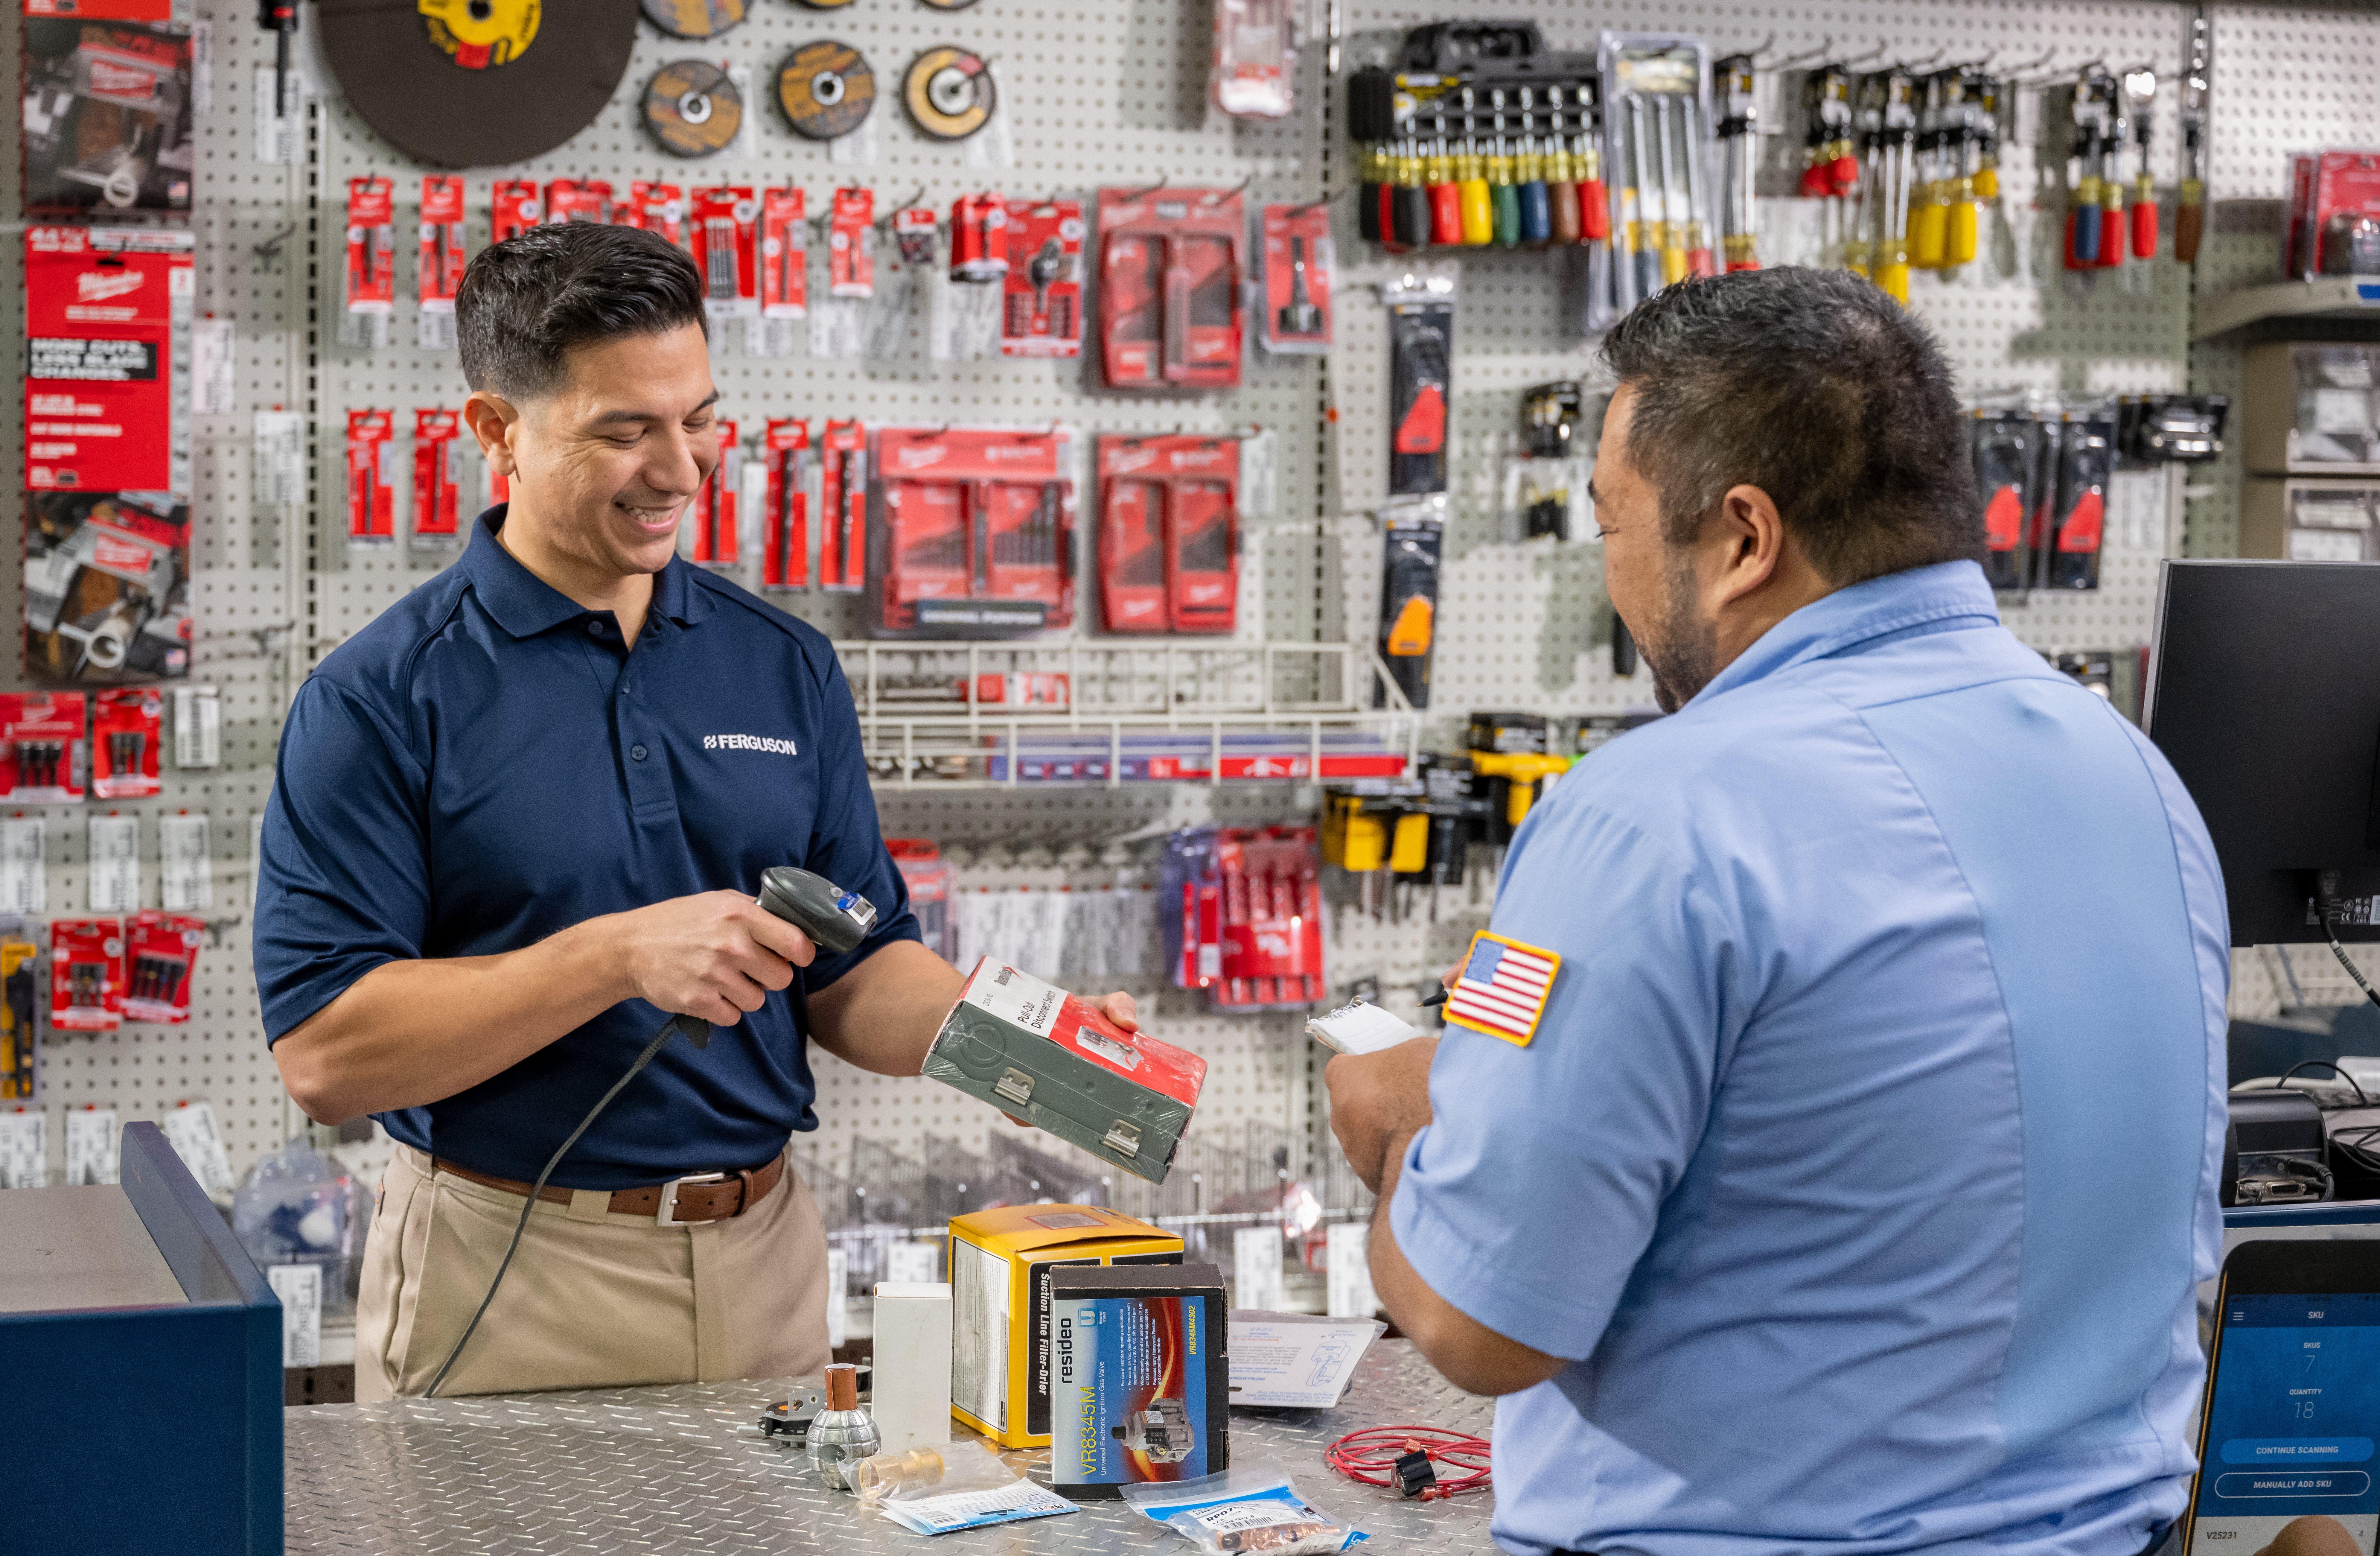 An associate discusses a product with a contractor at a Ferguson counter location.